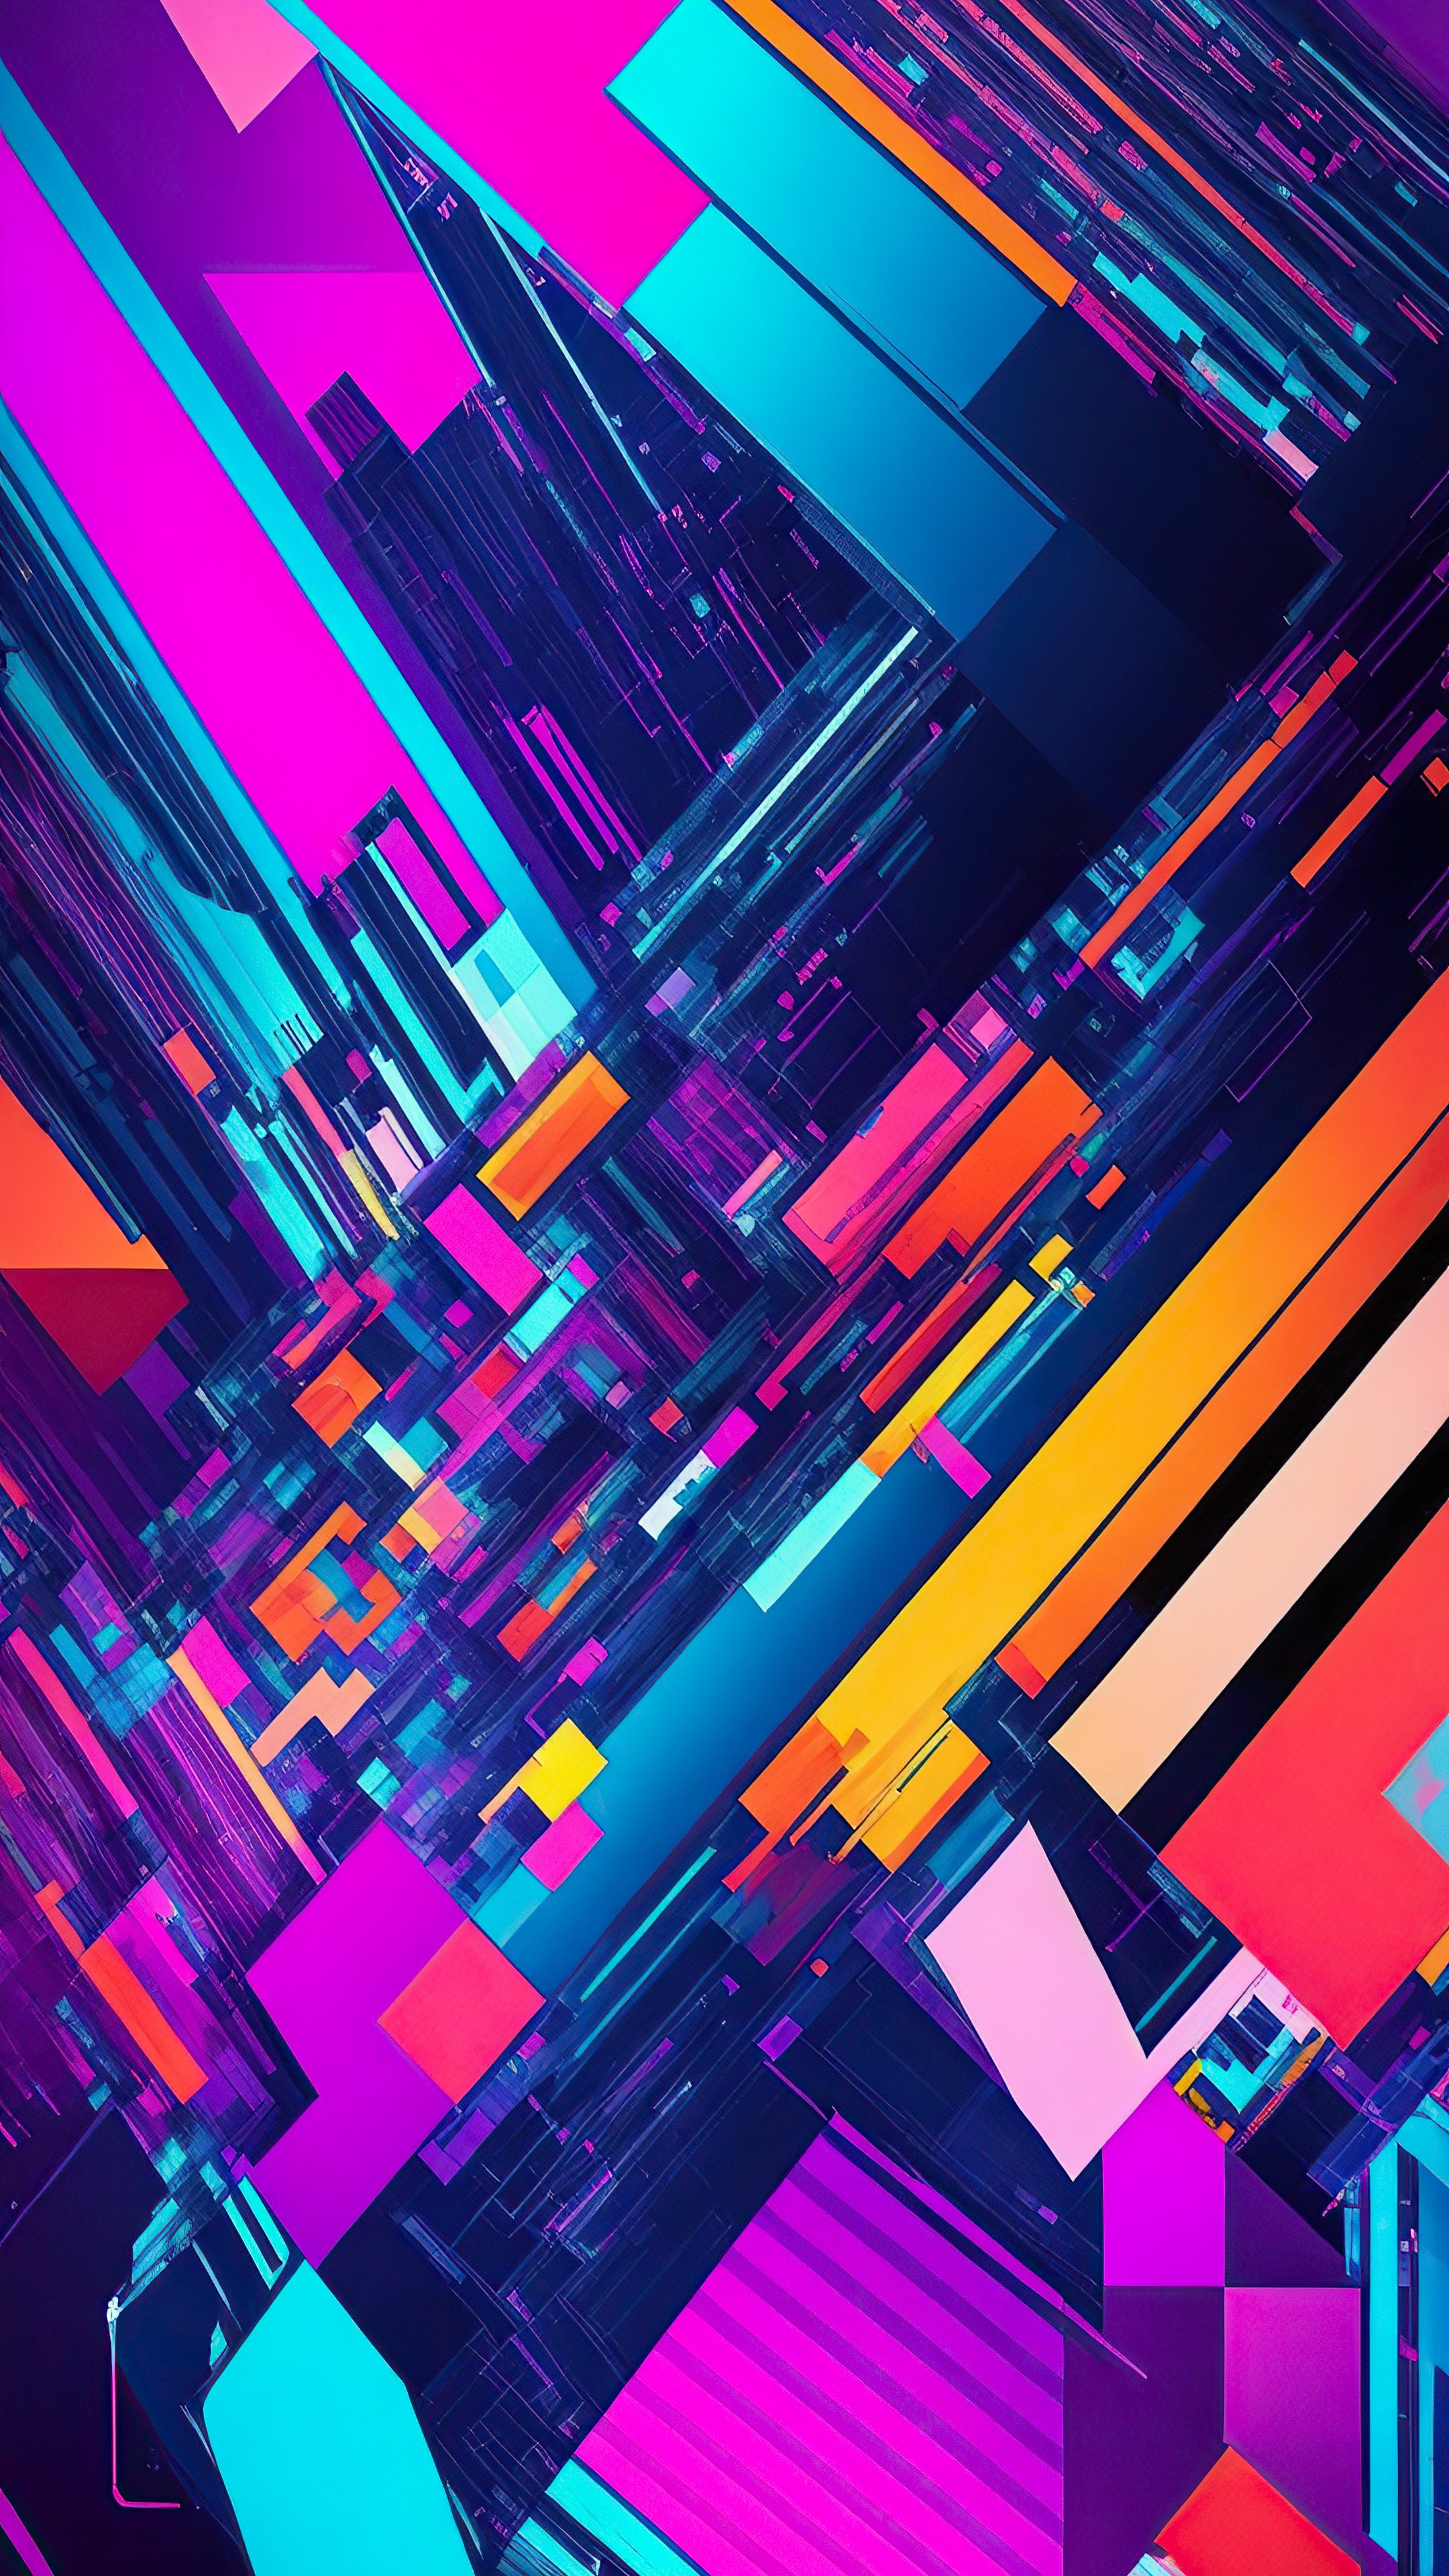 Embark on a journey of technology and art fusion with our abstract wallpaper, specifically crafted for the iPhone.